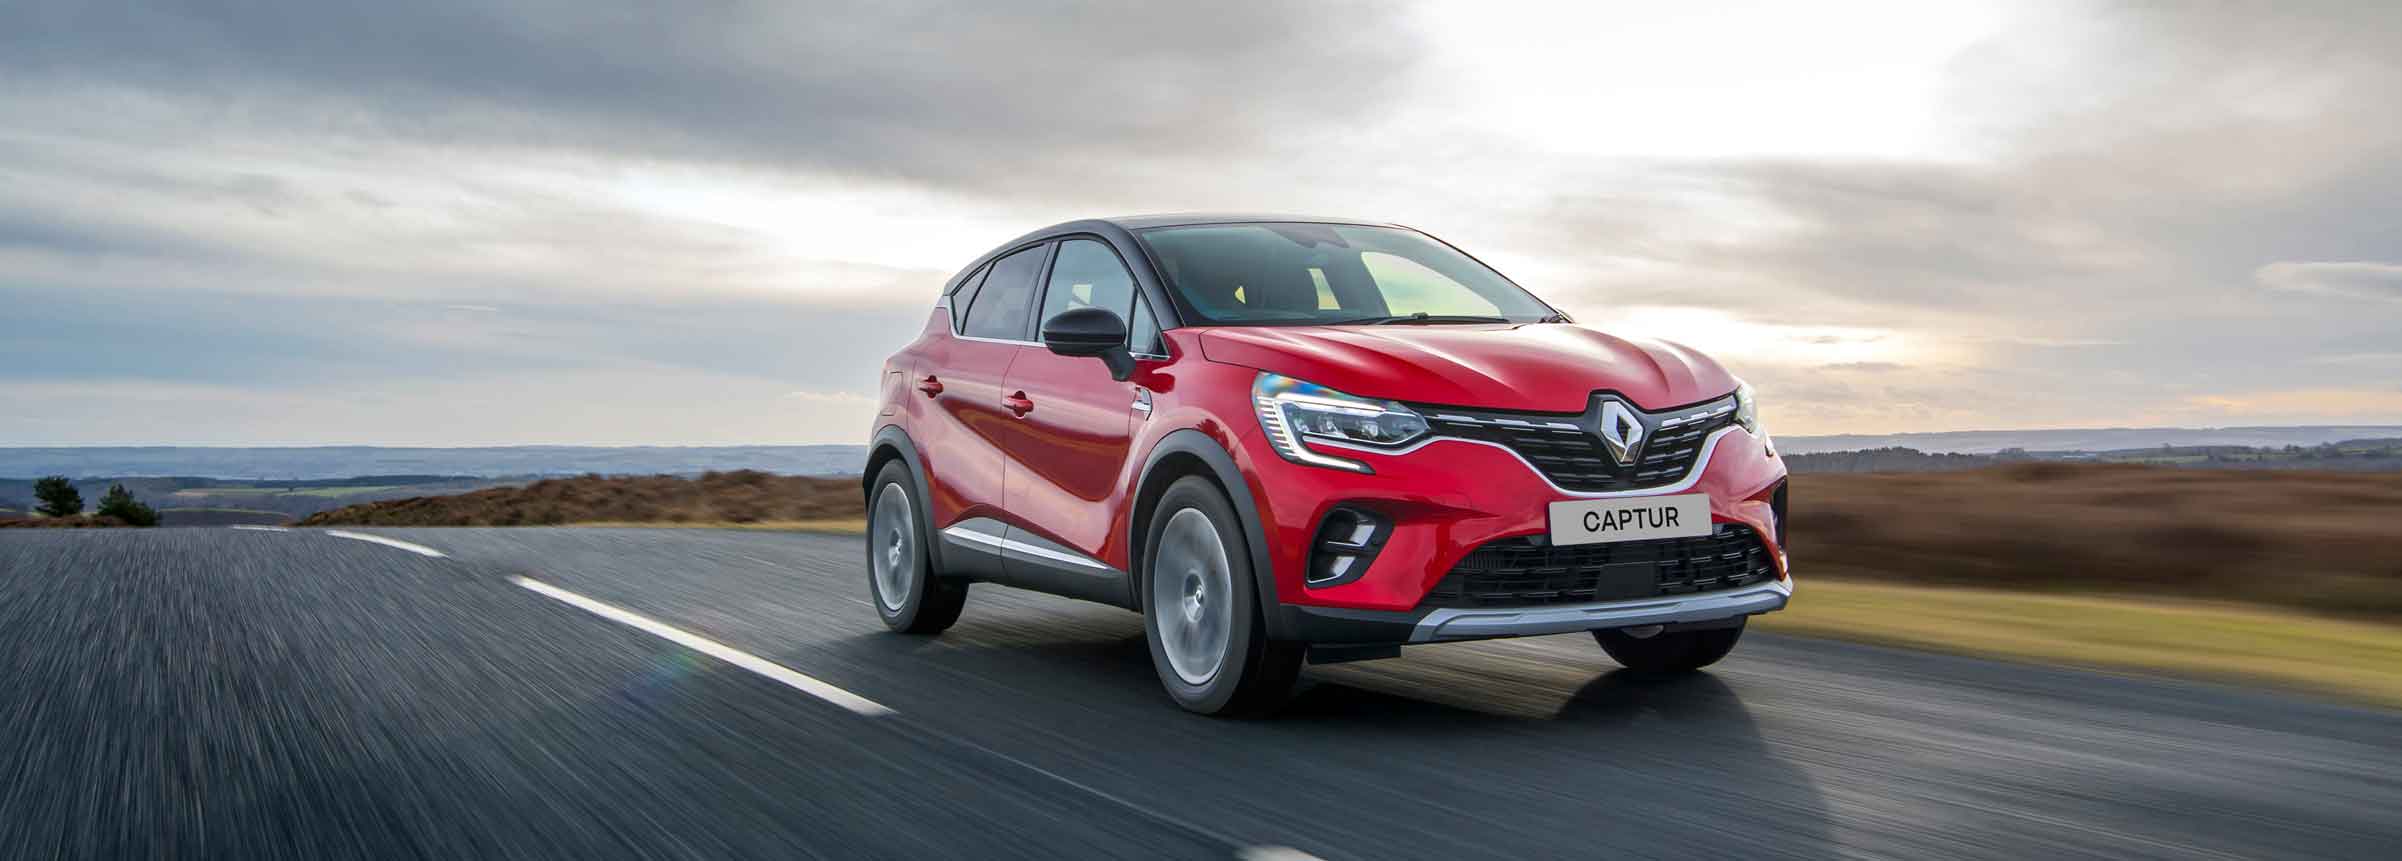 Renault launches all-new Captur